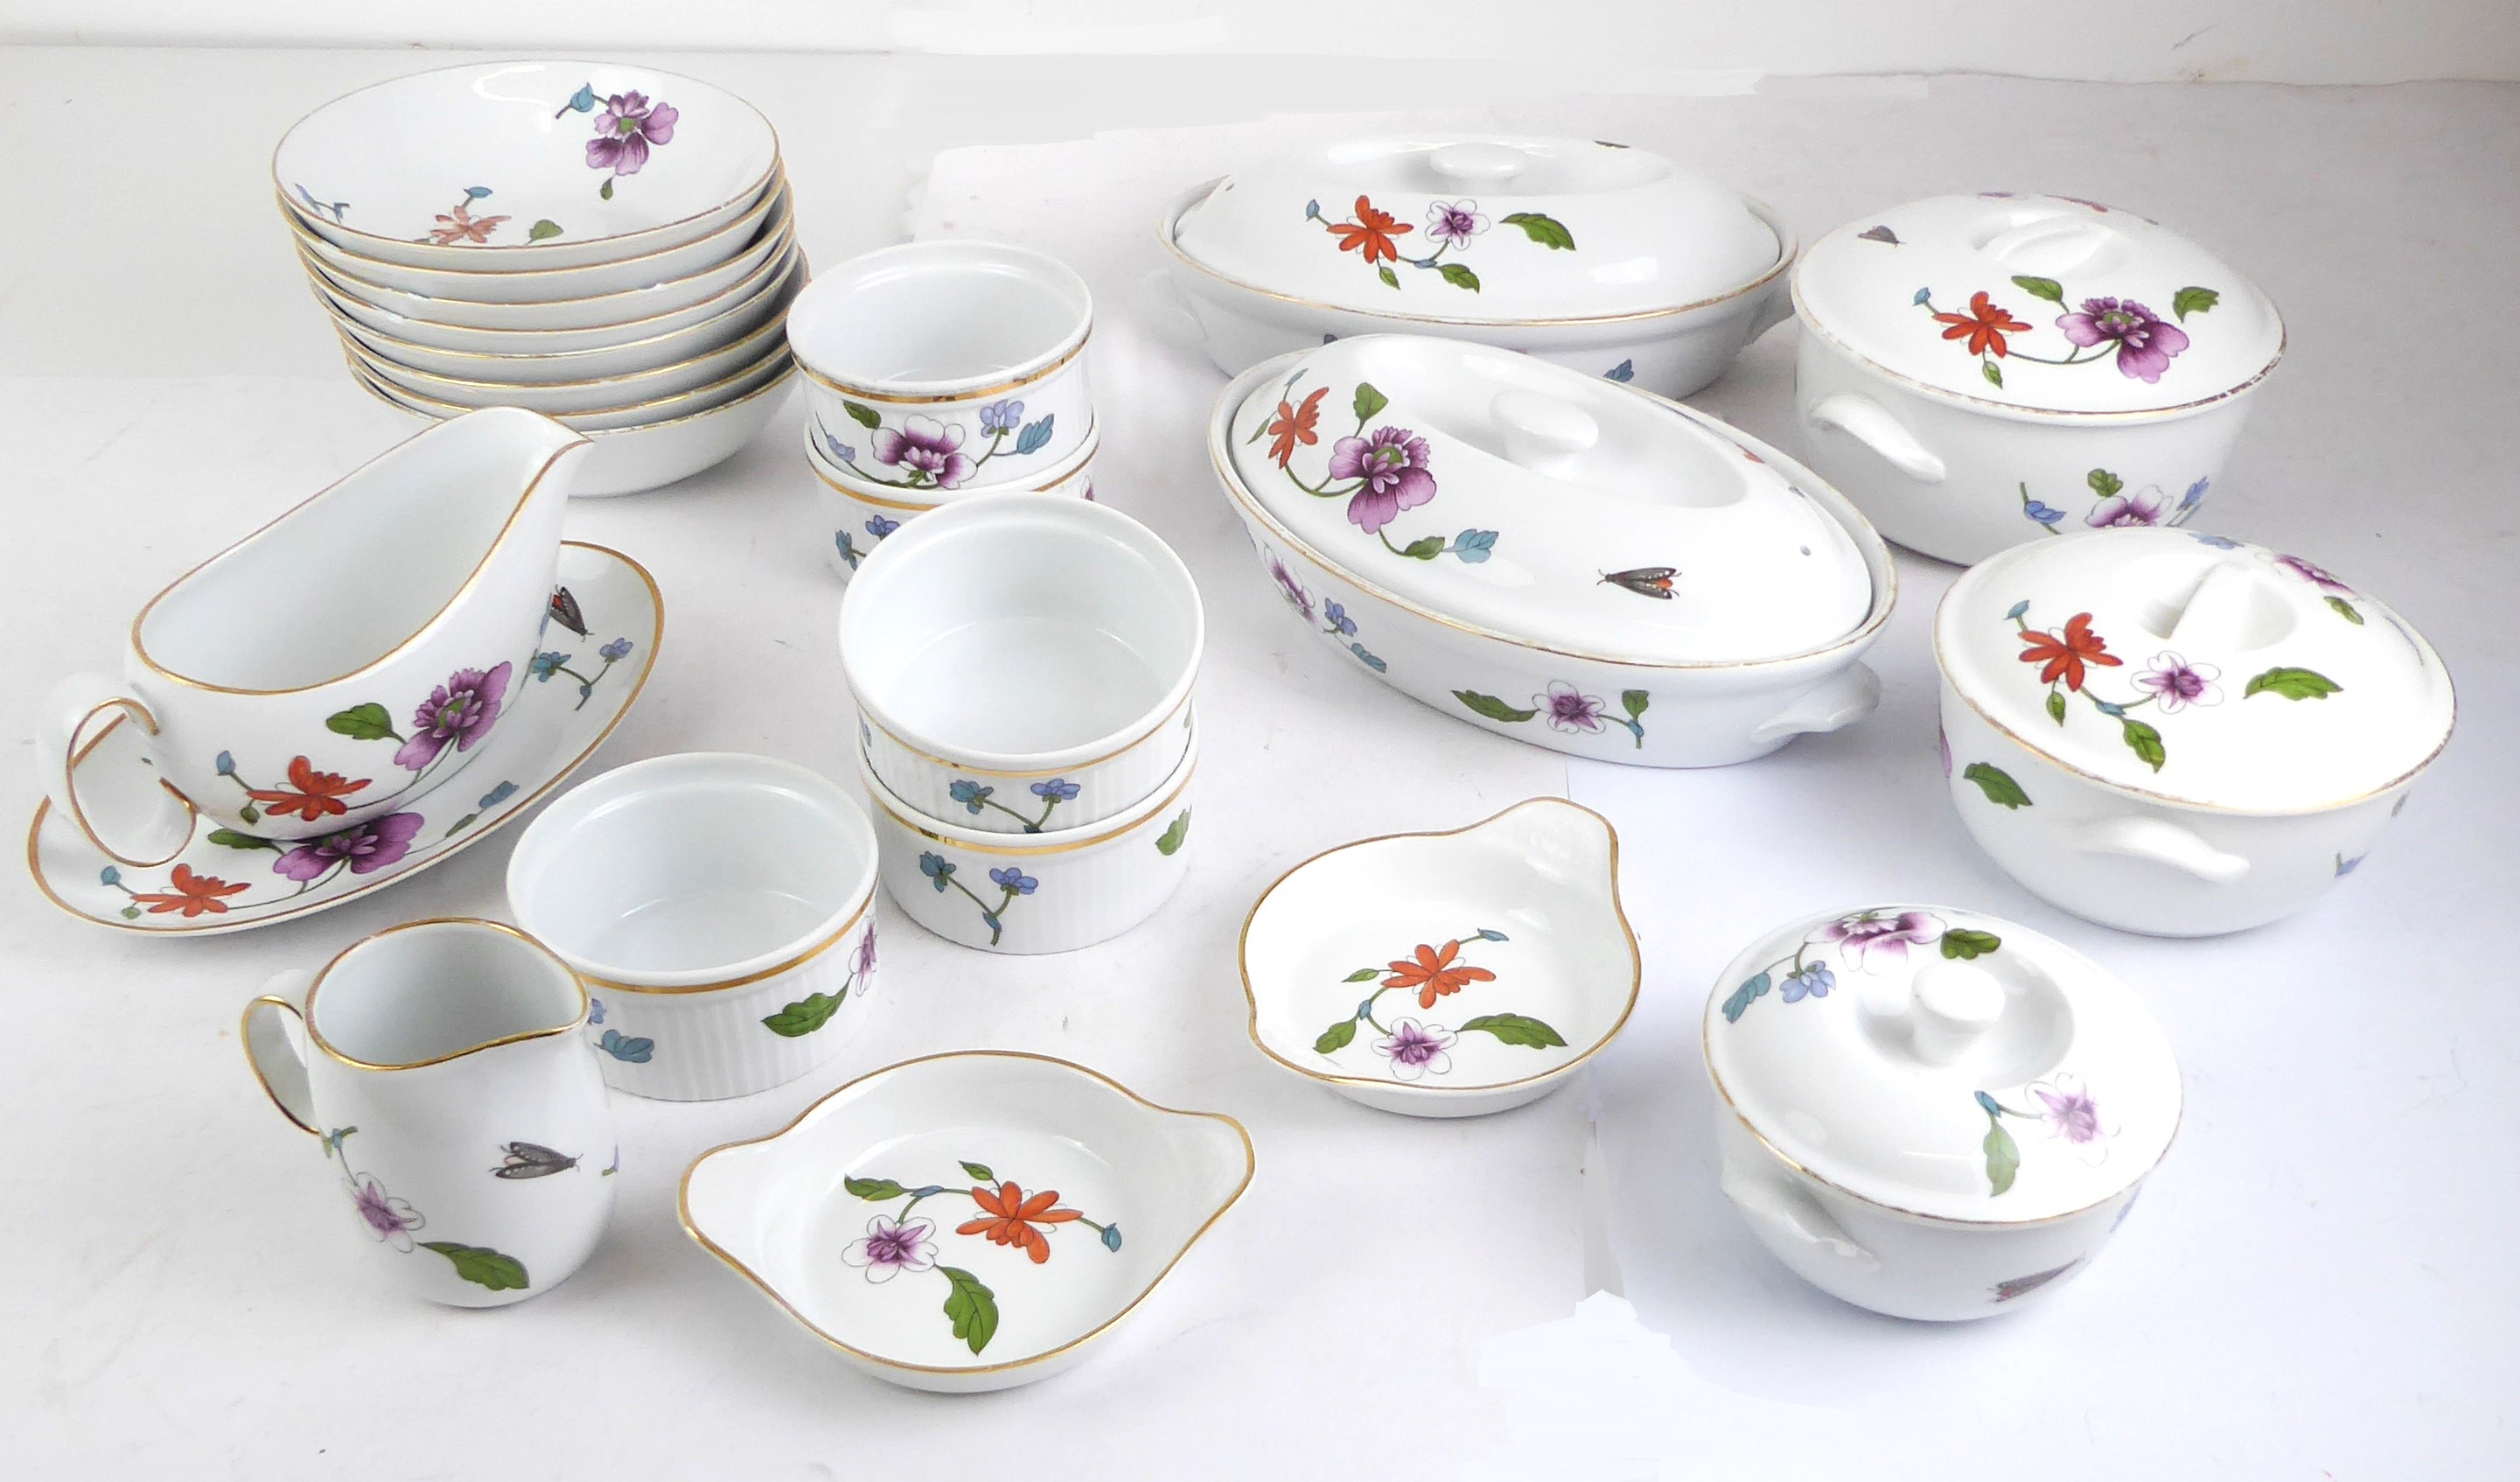 A selection of Royal Worcester porcelain oven to tableware 'Astley' pattern to comprise: 2 oval